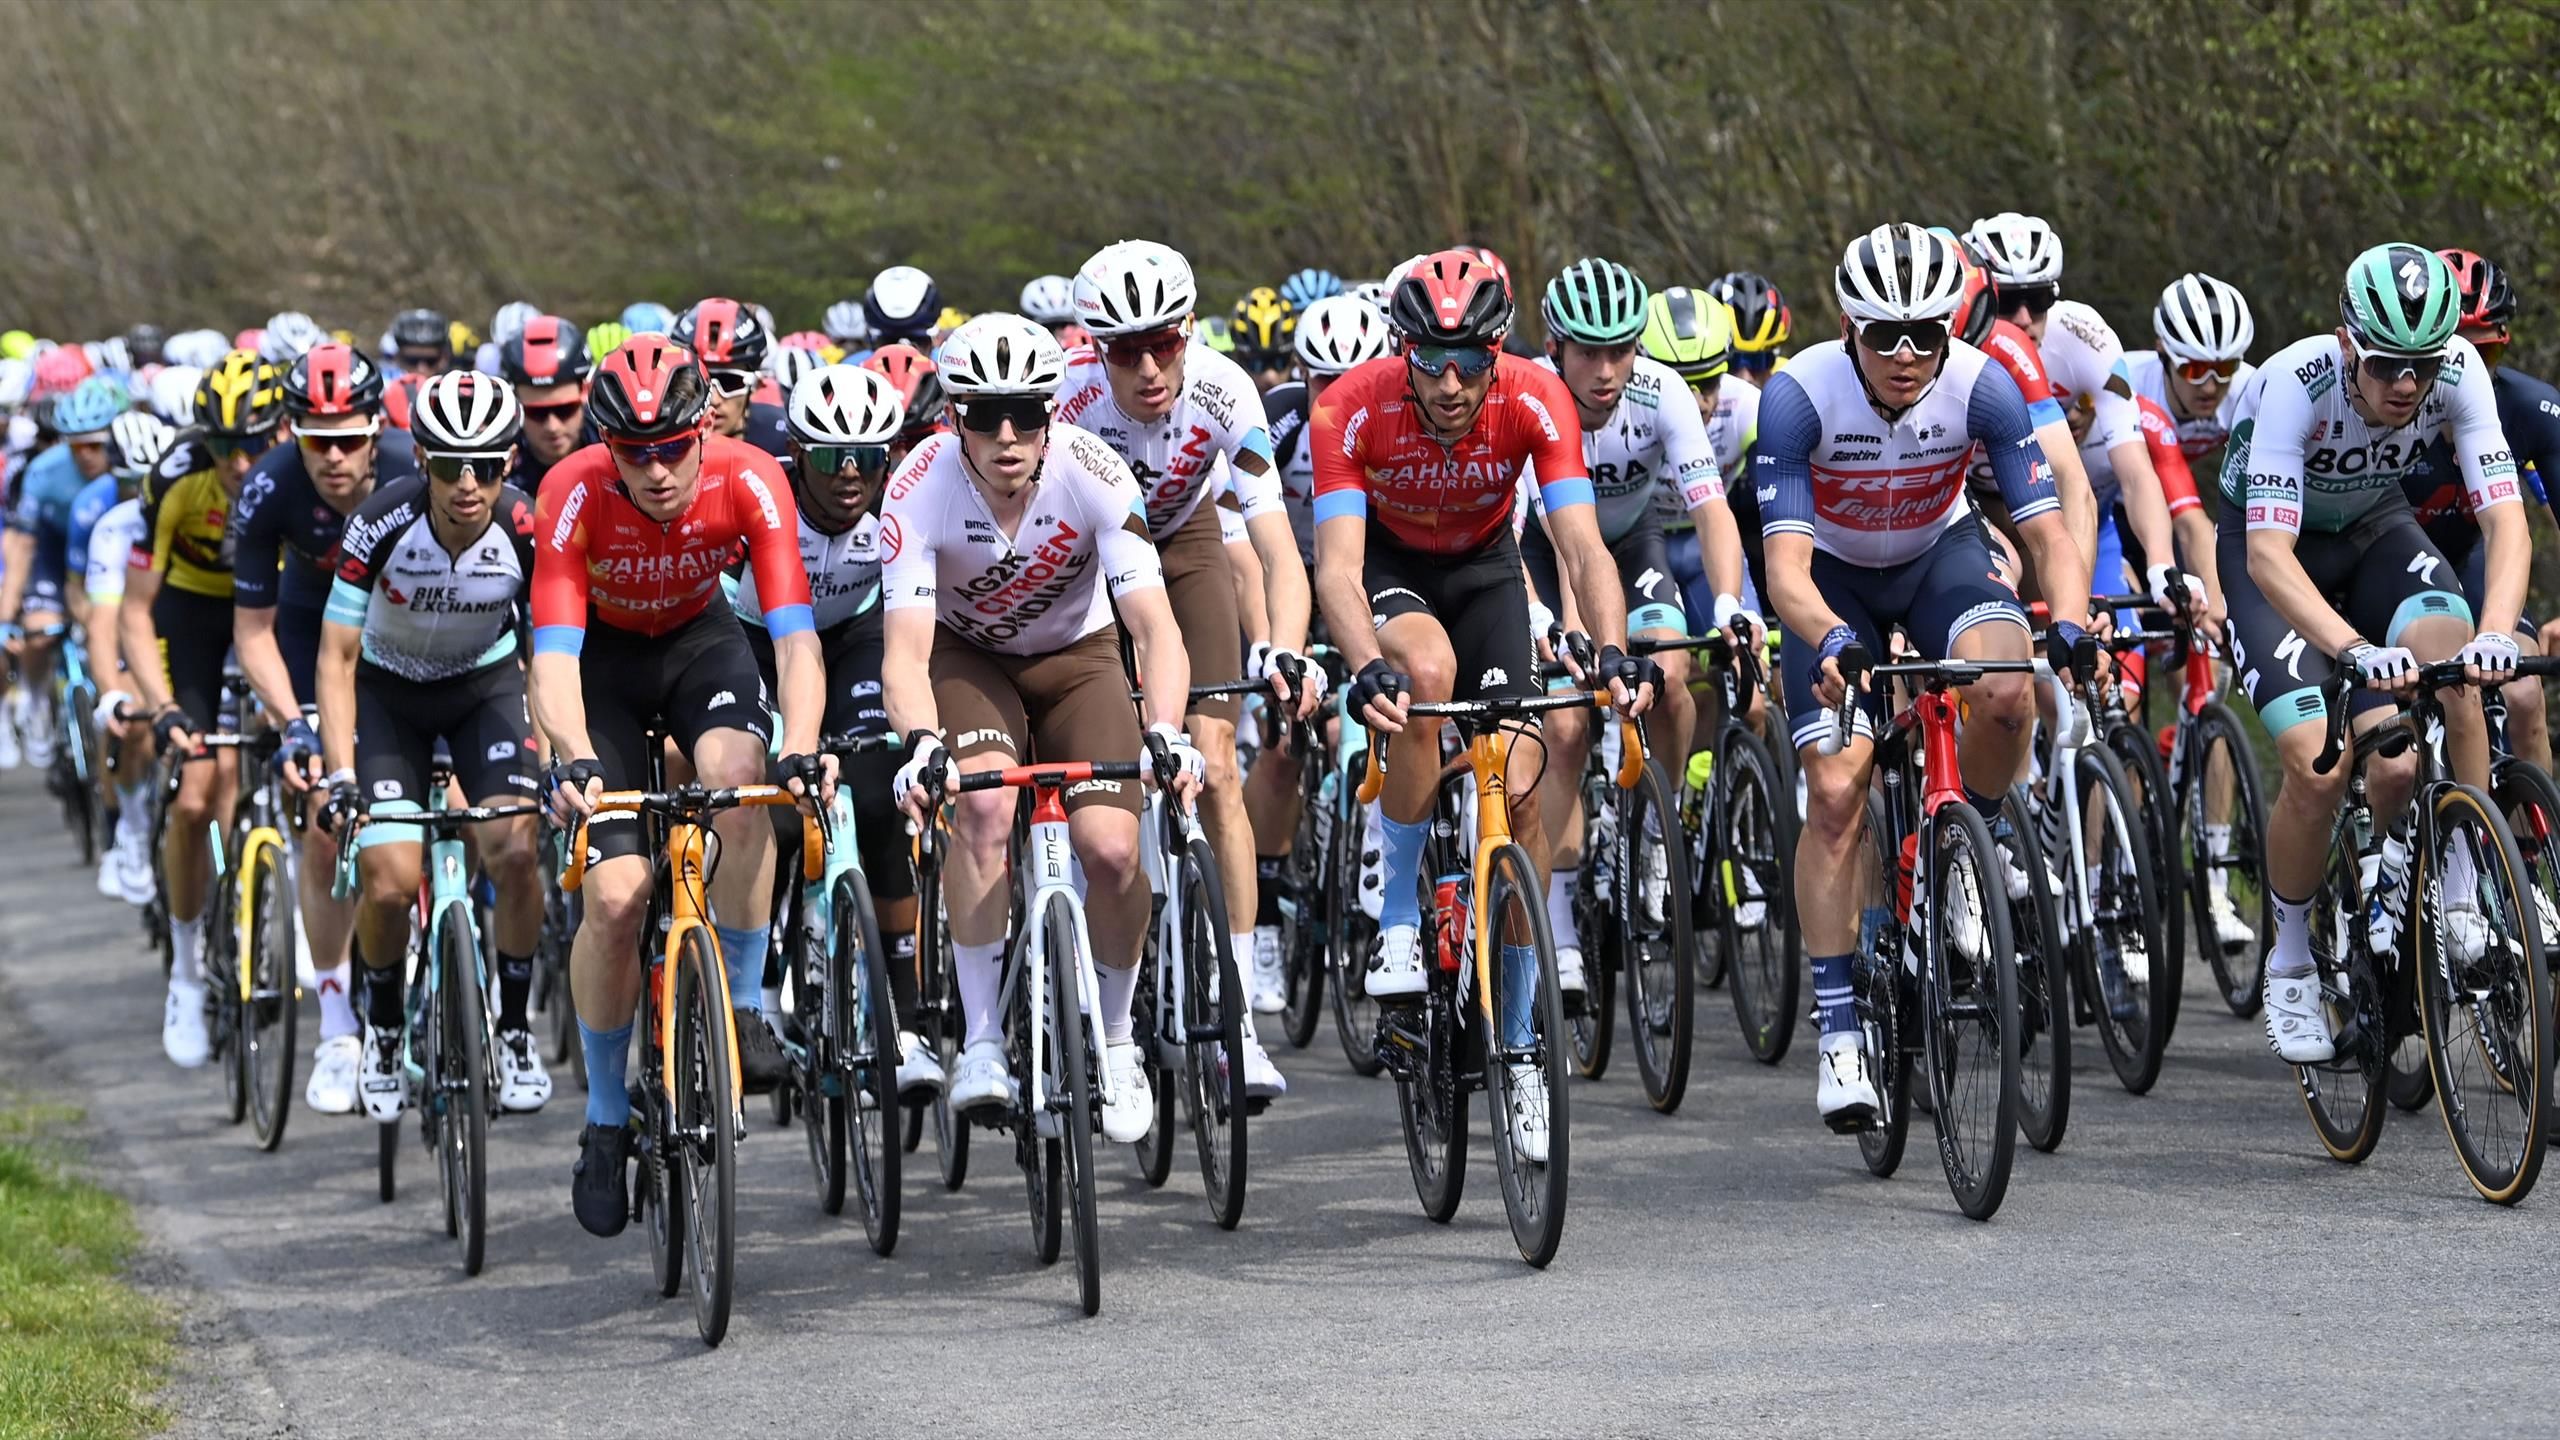 Fleche Wallonne 2021 cycling LIVE - Tom Pidcock, Julian Alaphilippe, Primoz Roglic in action